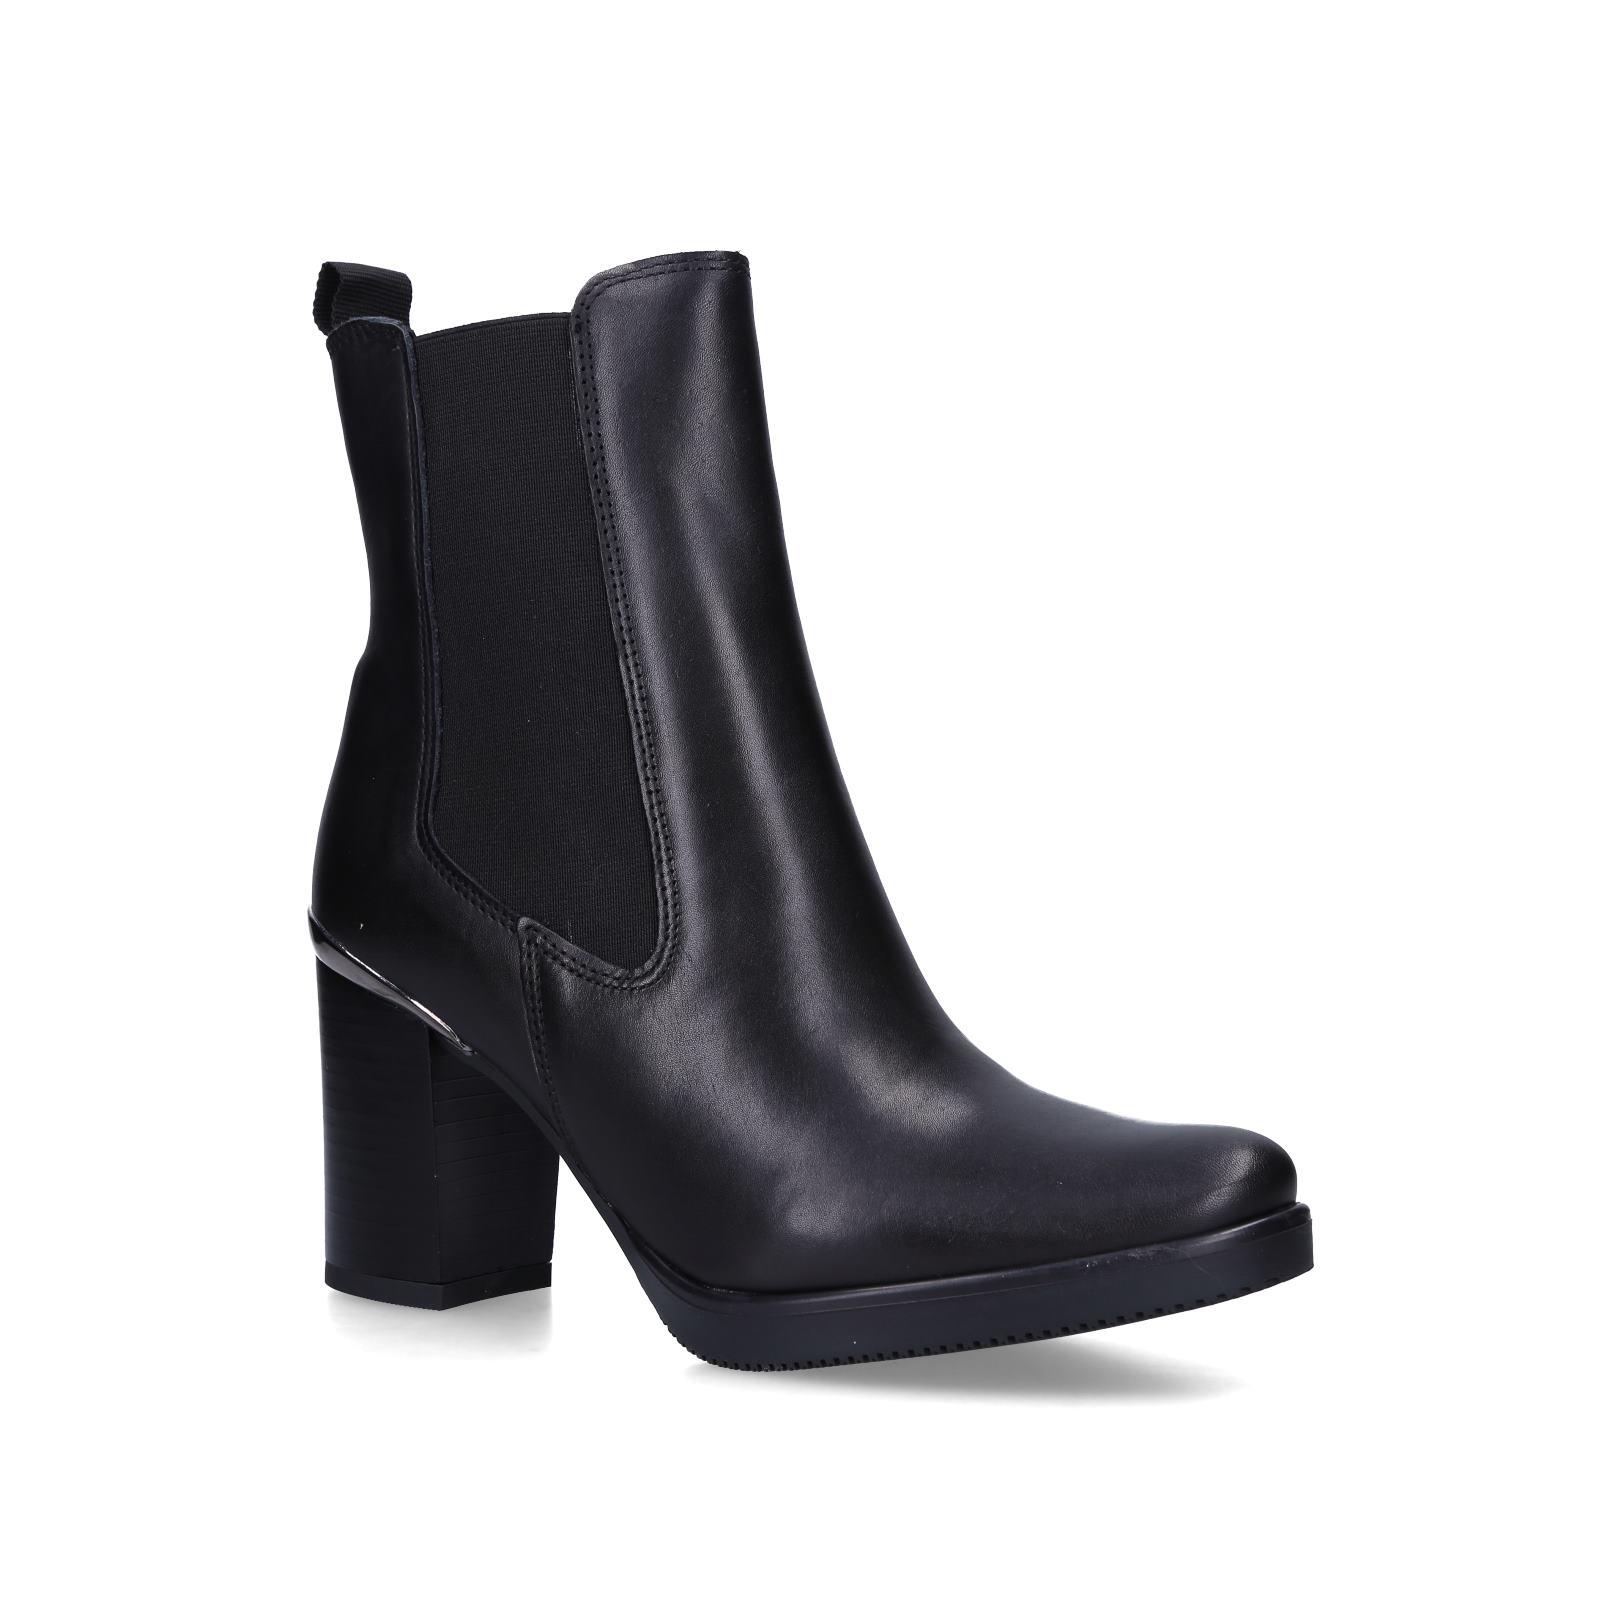 REACH ANKLE BOOT - CARVELA COMFORT Ankle Boots